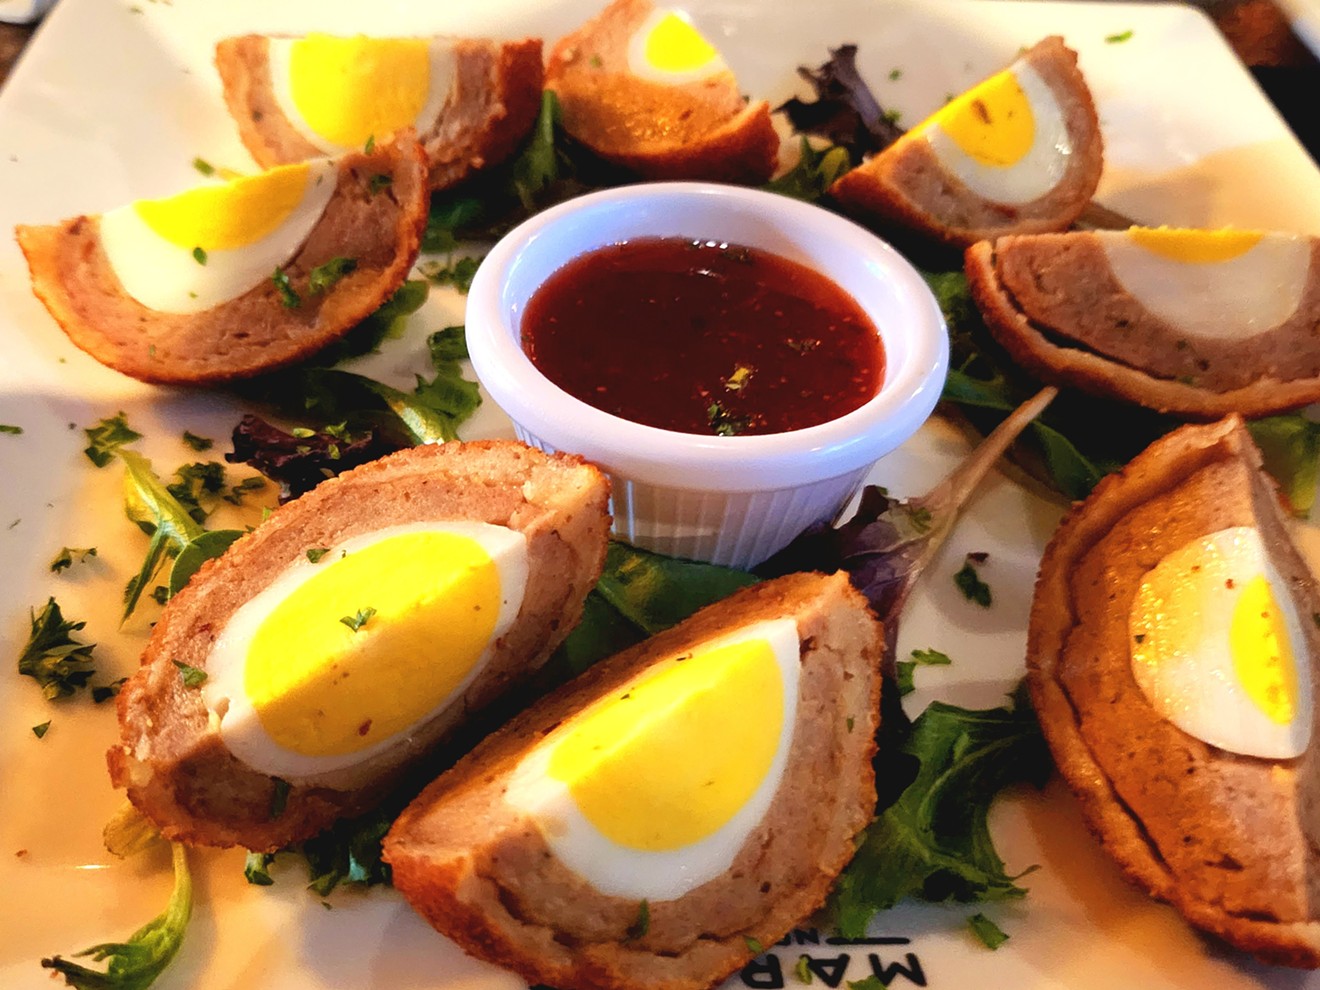 The Londoner's Scotch eggs come paired with strawberry-jalapeño jam.